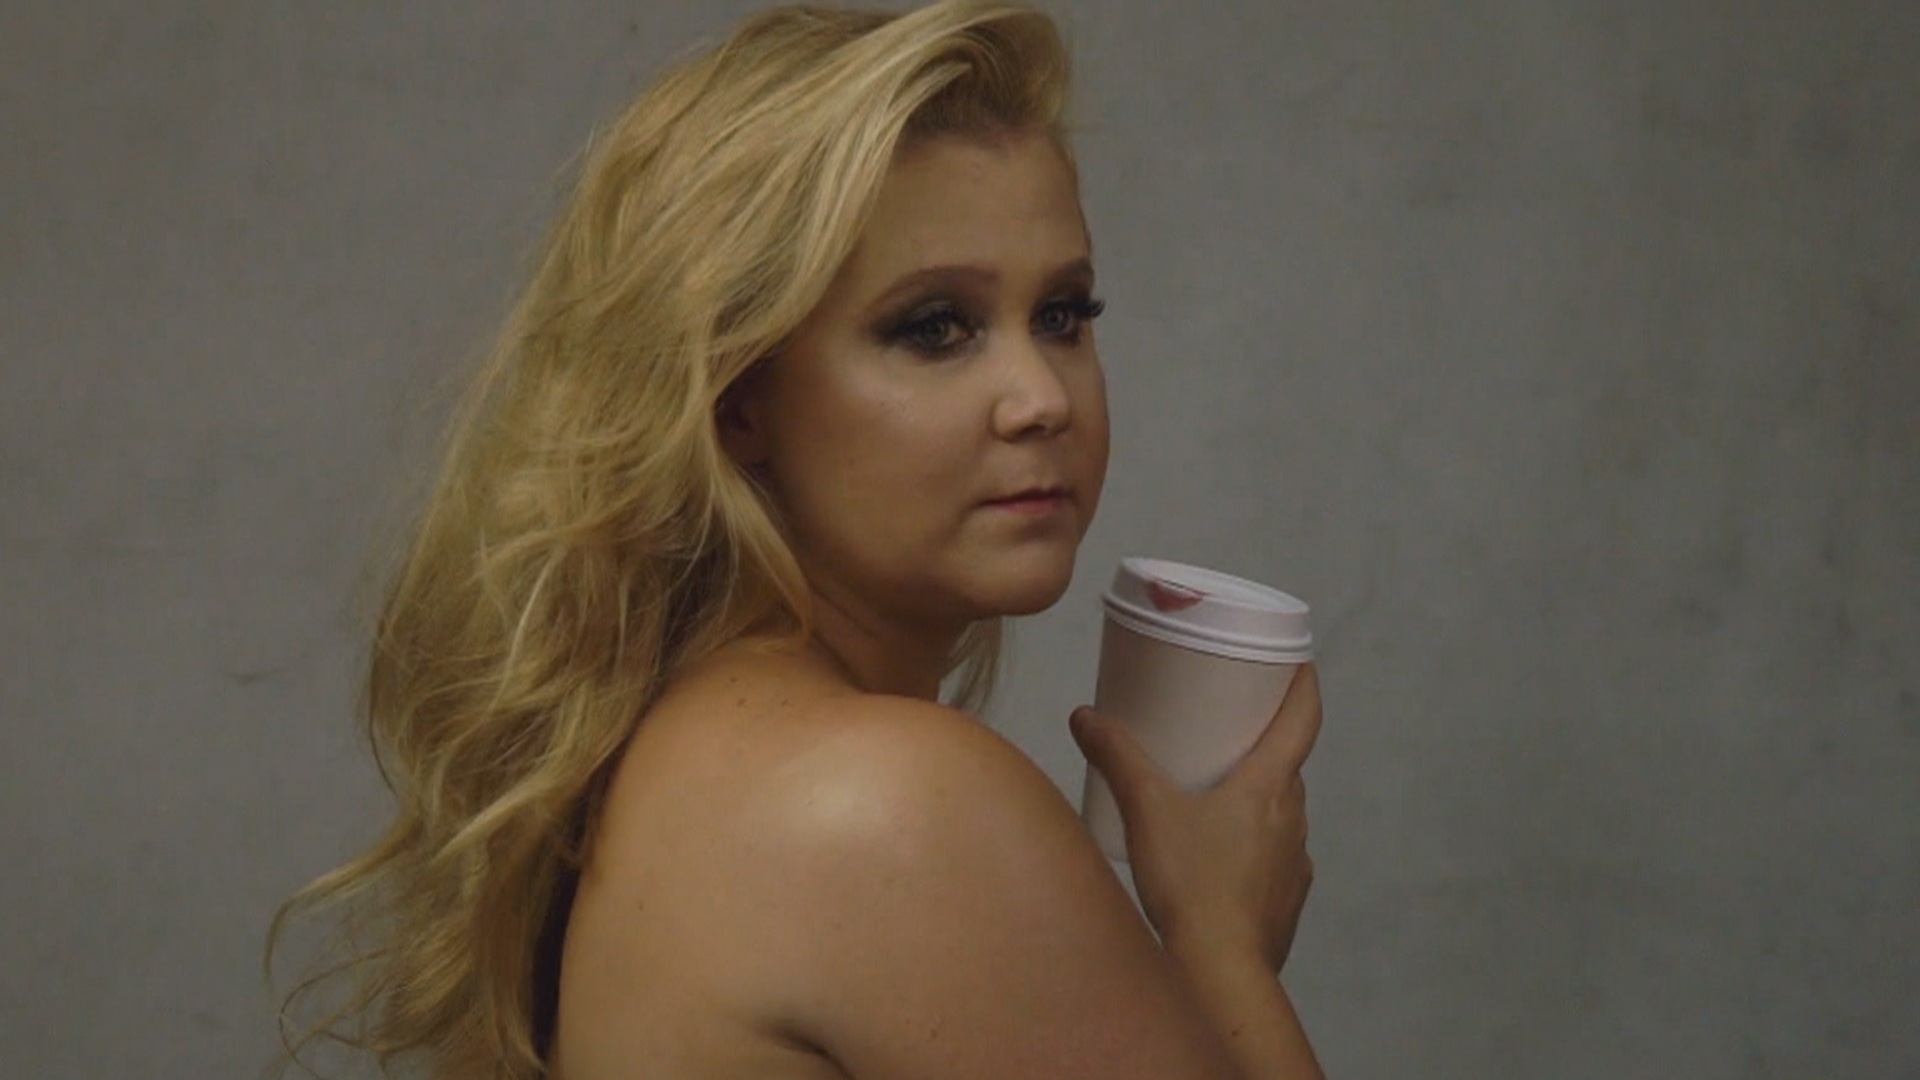 Schumer pictures amy sexy Amy Schumer